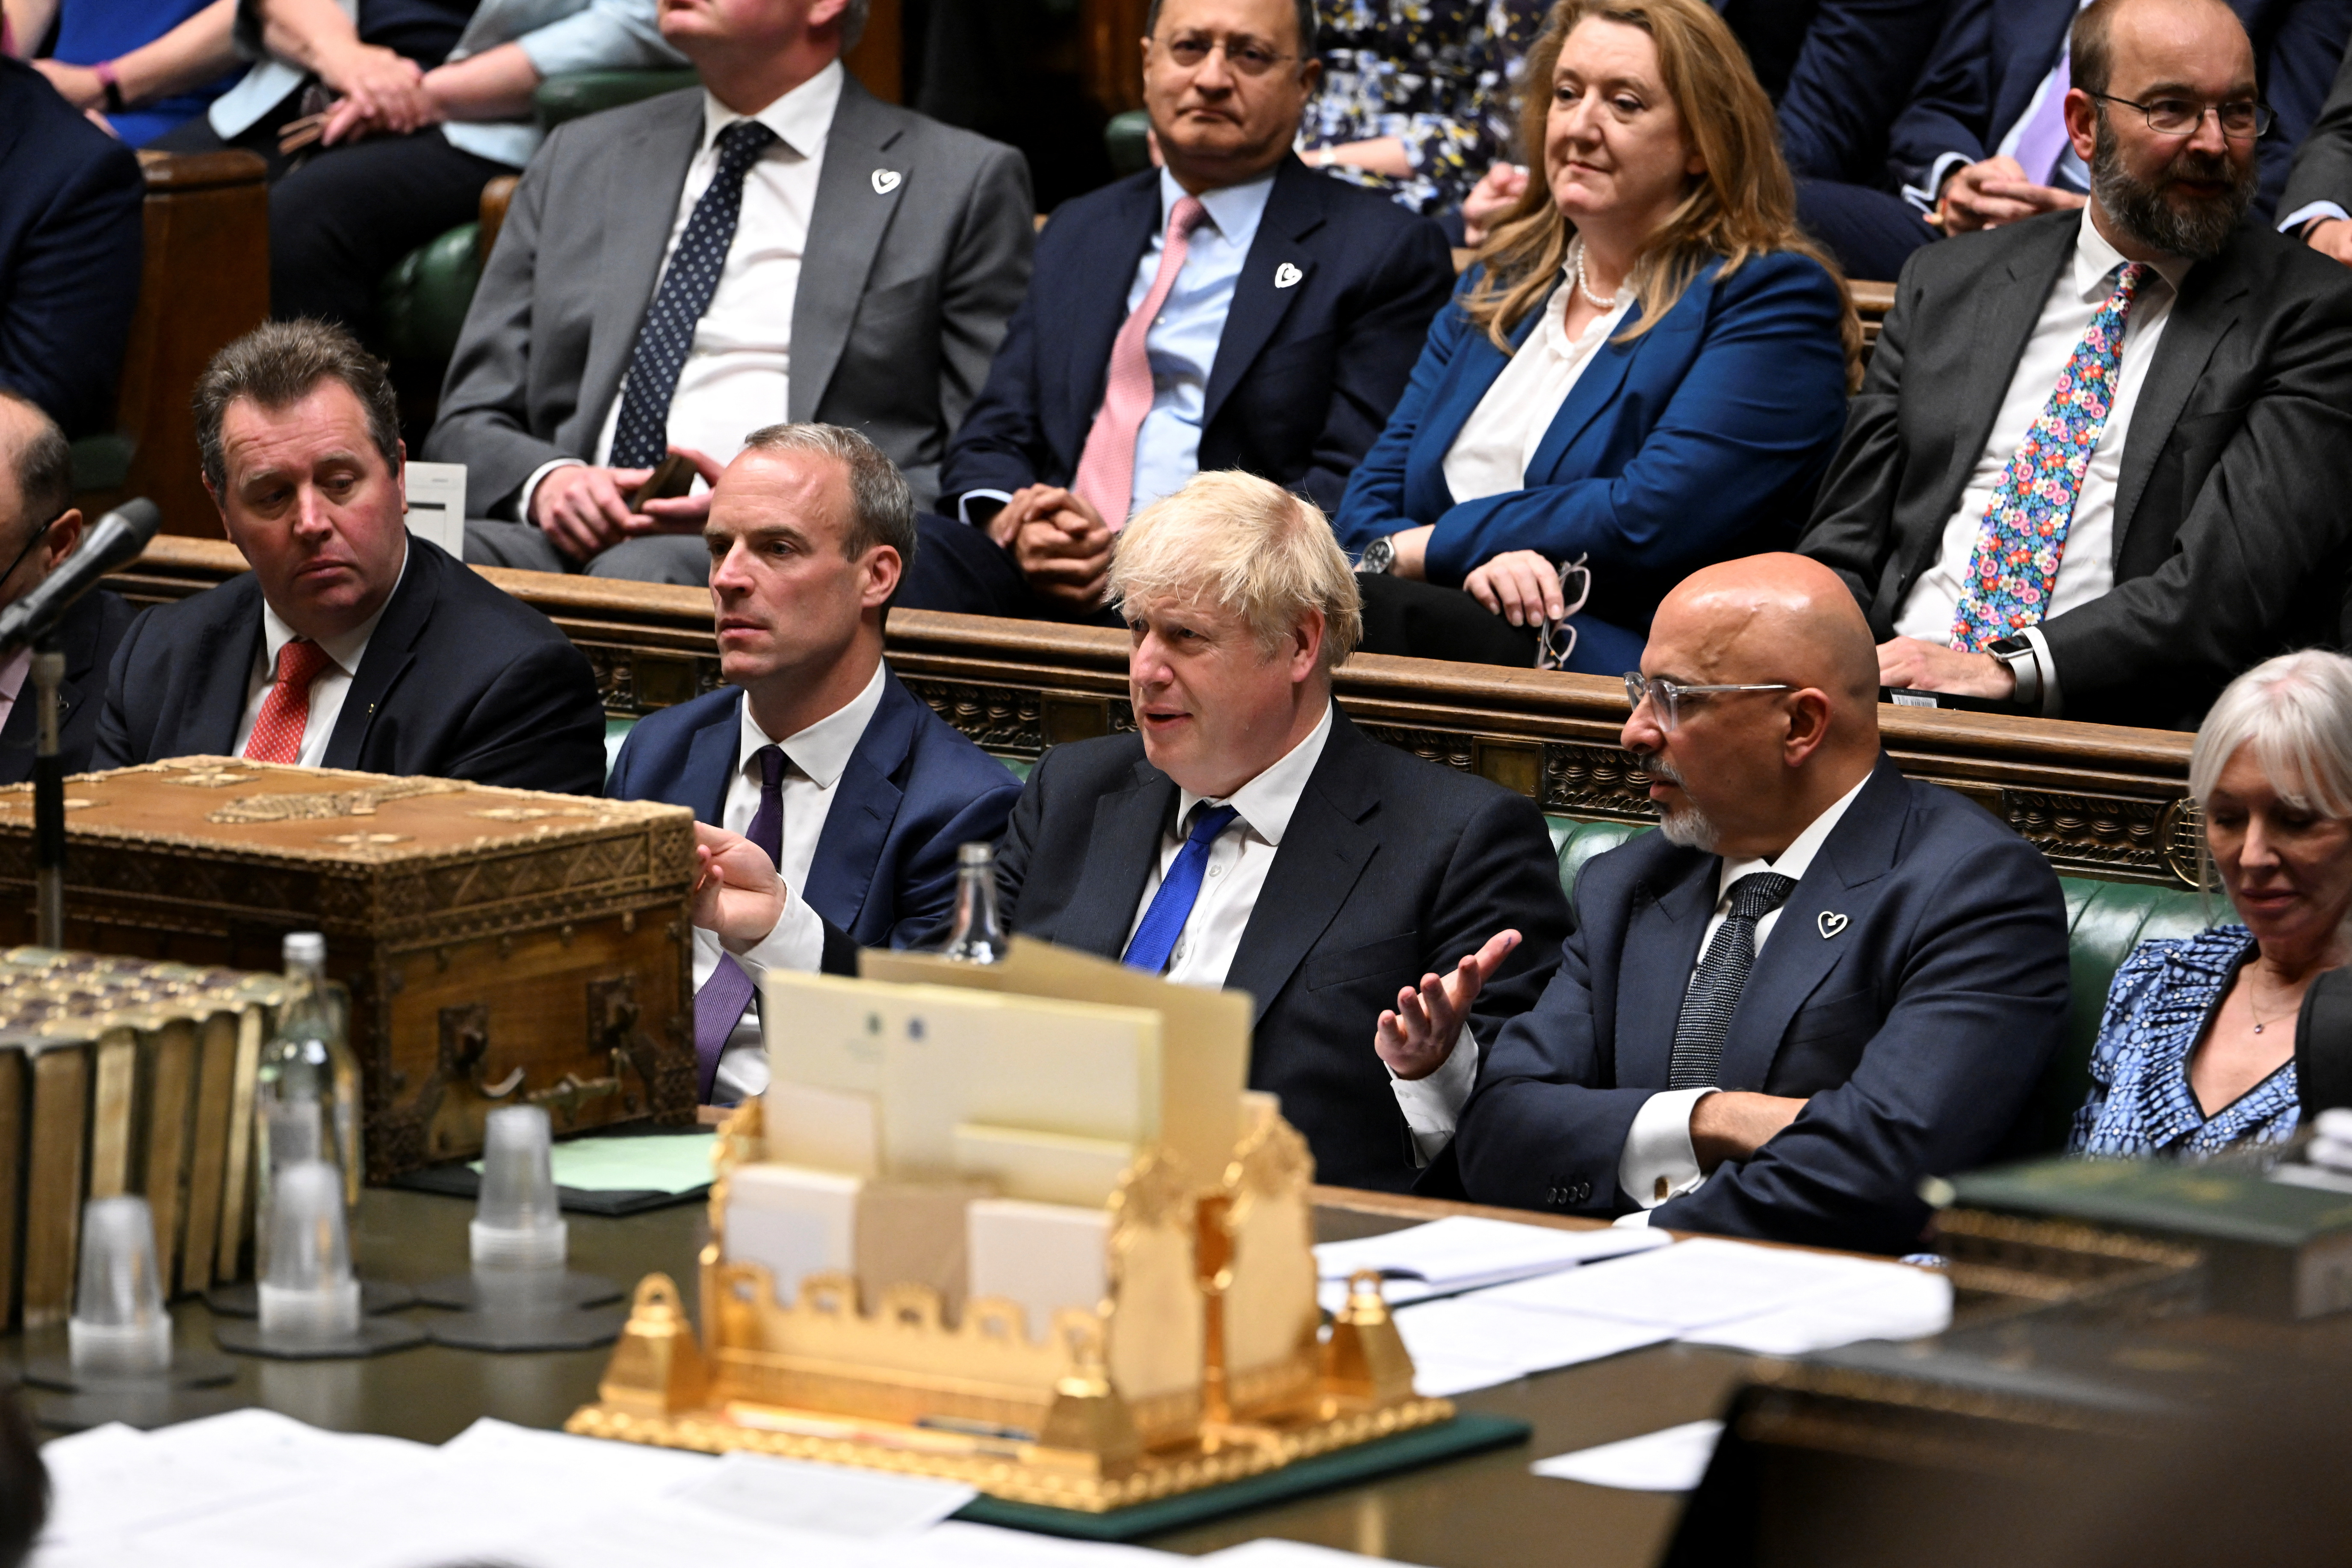 Prime Minister's Questions at the House of Commons in London